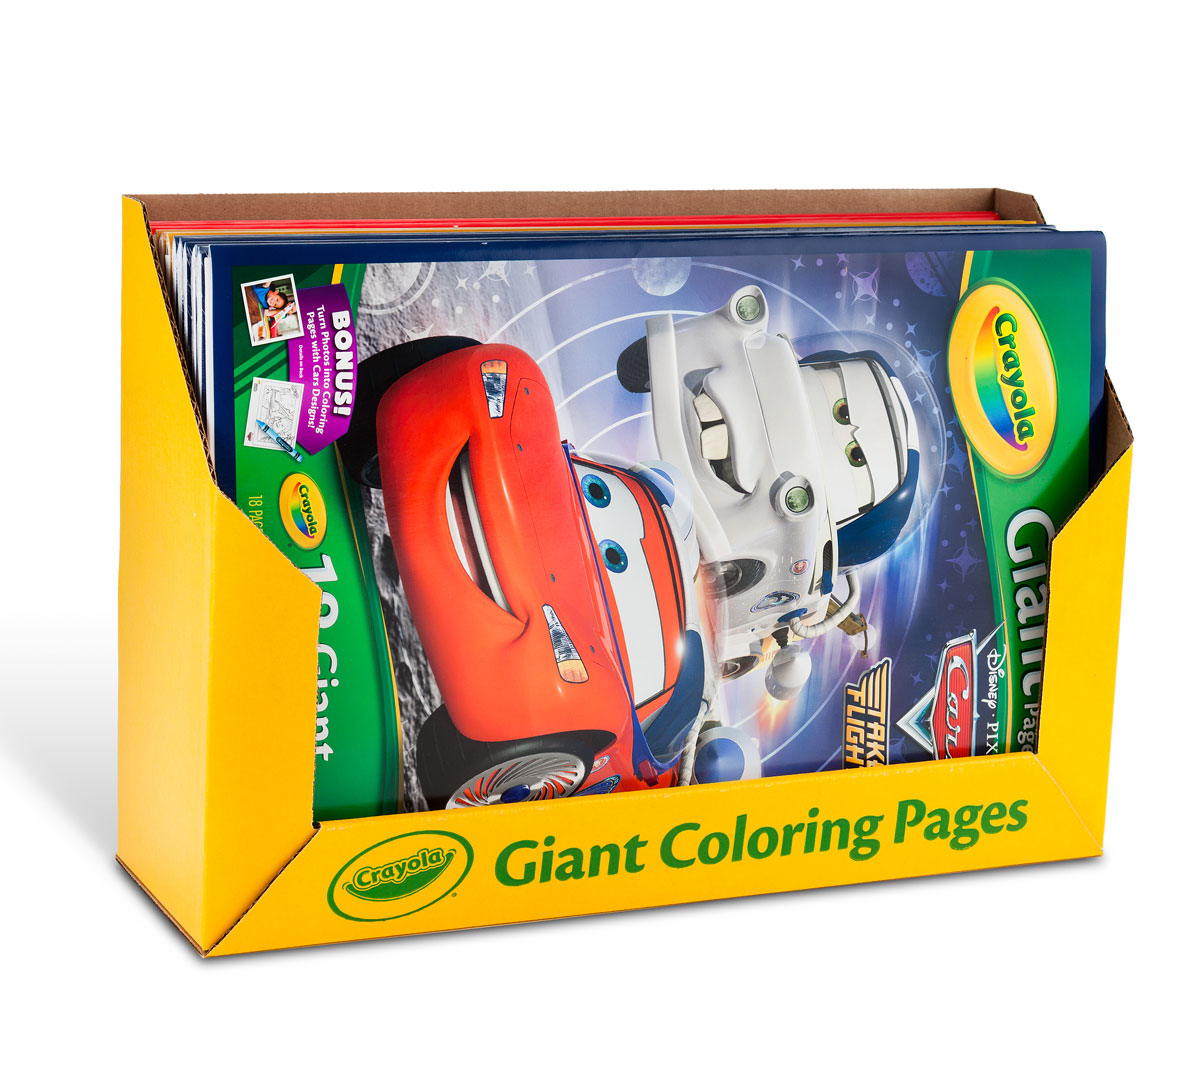 Download Giant Coloring Pages Assorted Bulk Case Crayola